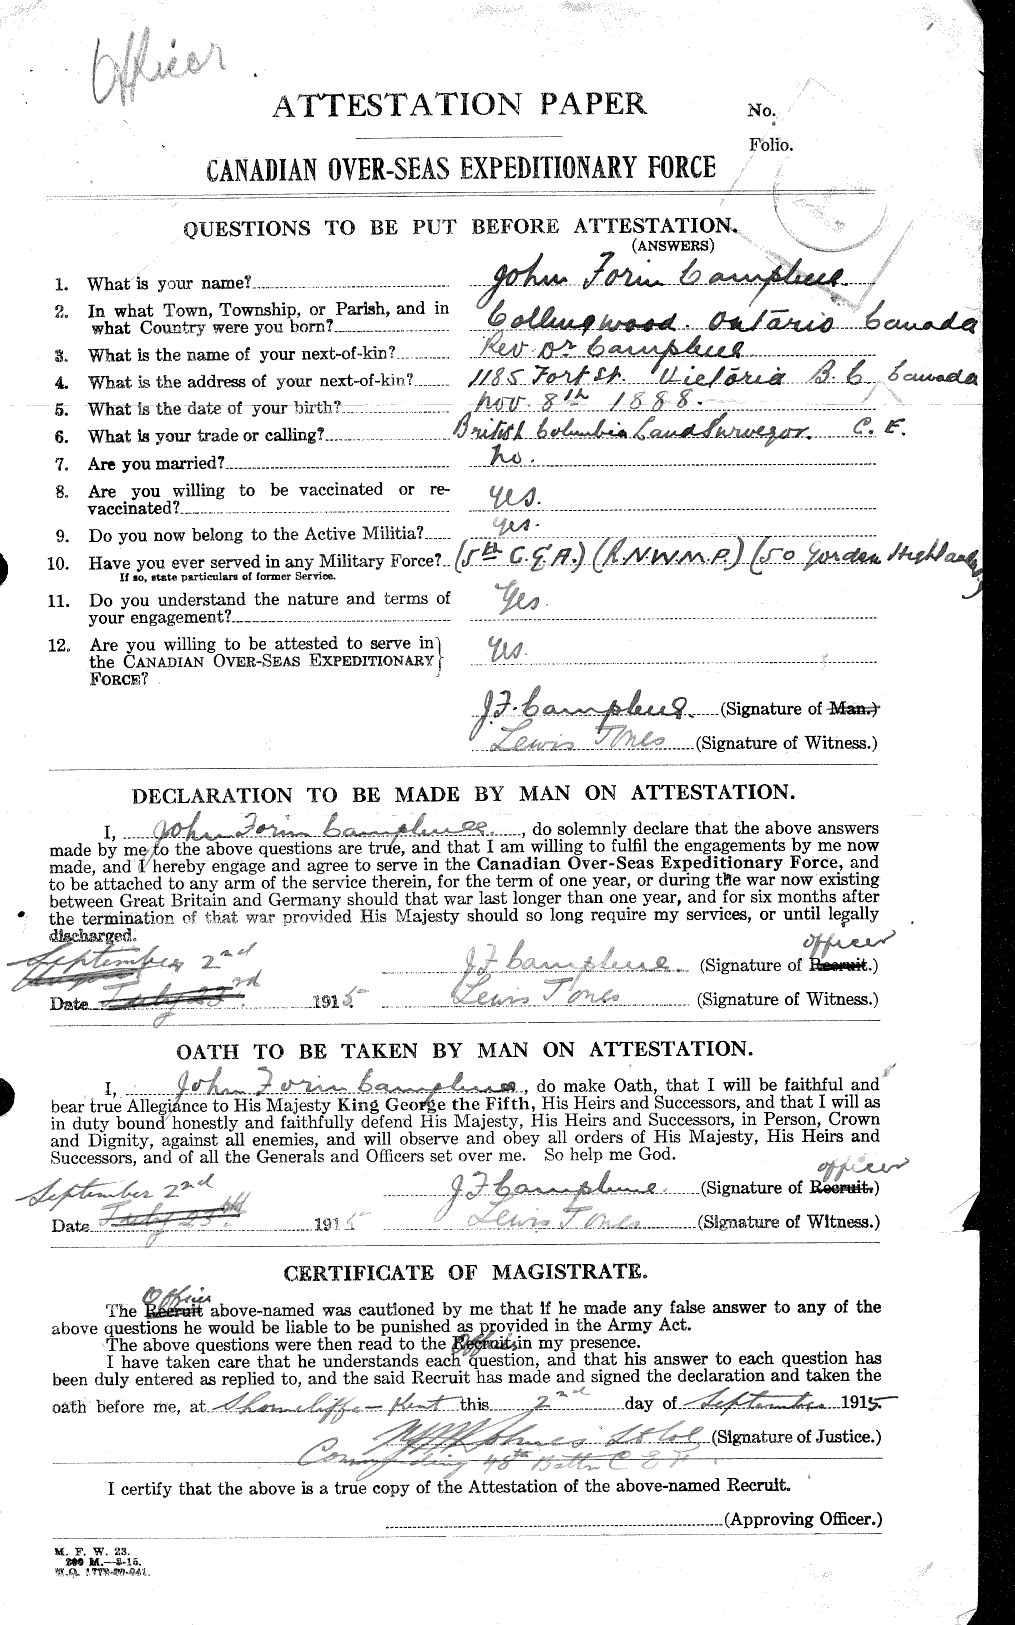 Personnel Records of the First World War - CEF 008520a